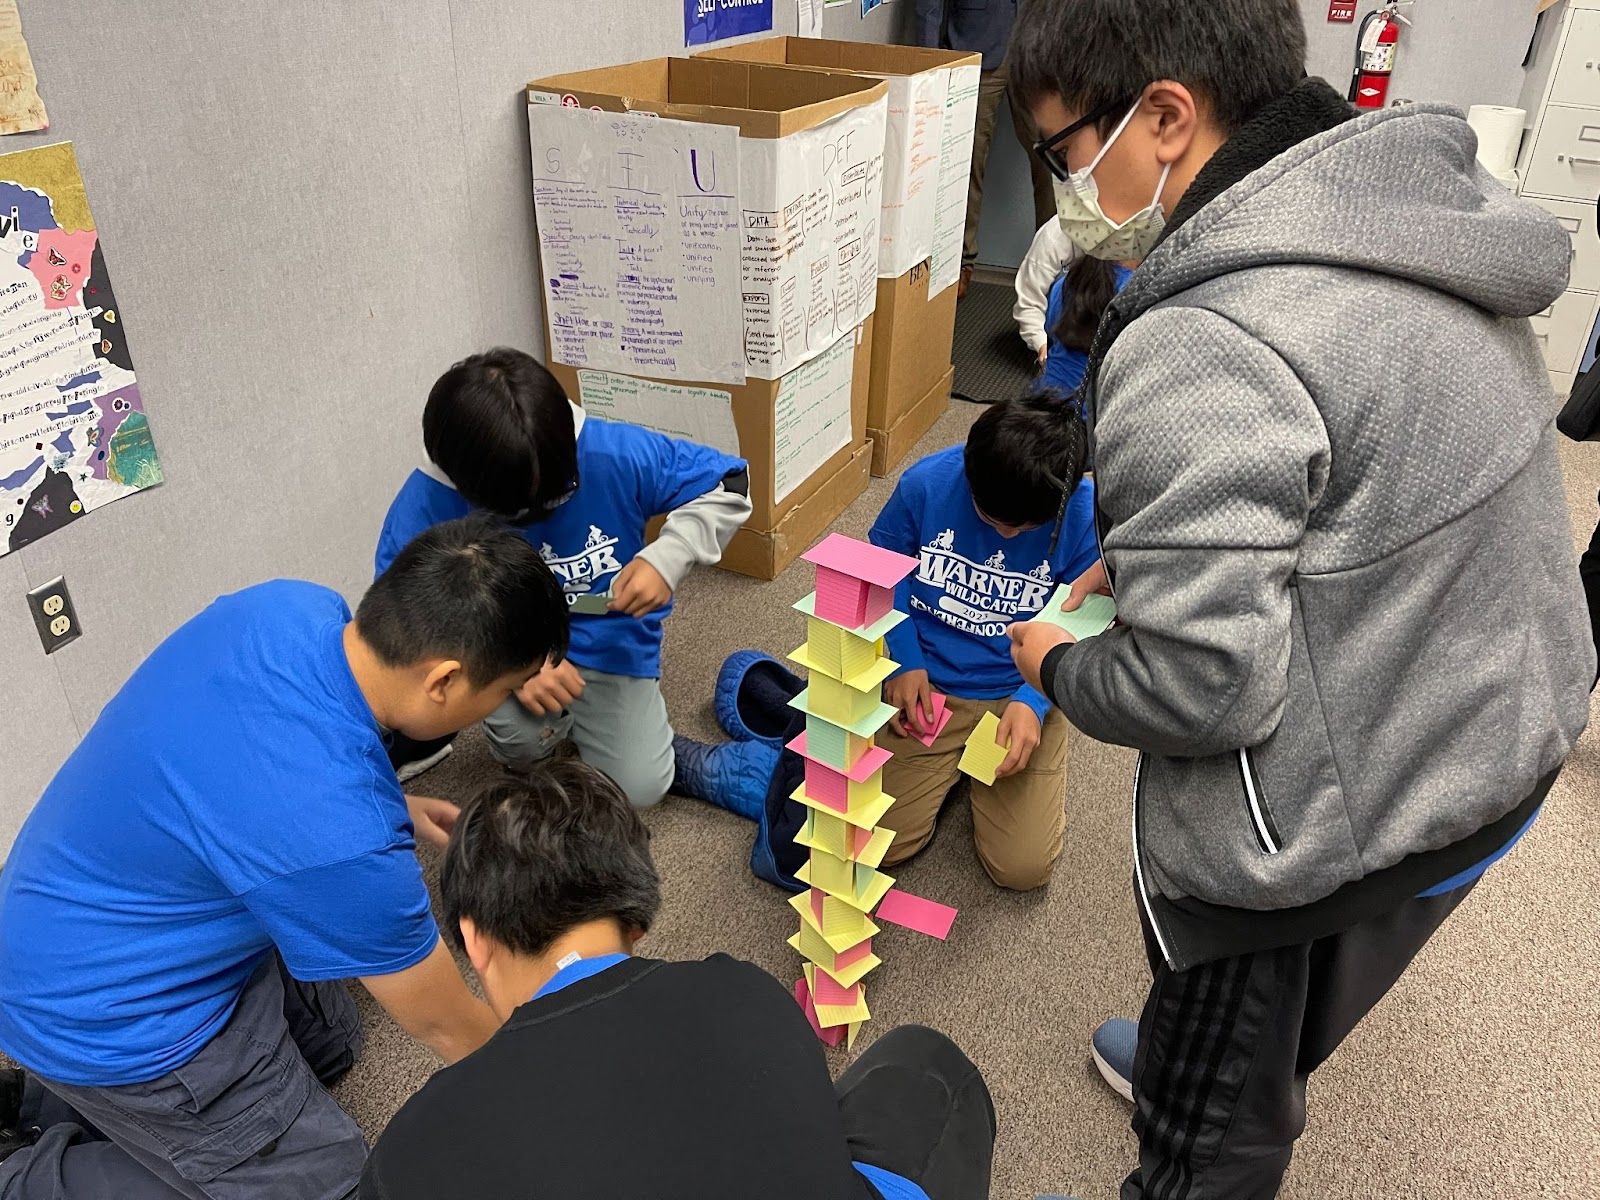 Warner Middle School students take part in a team-building exercise where kids have to build a tower using index cards but they cannot speak during the construction. Photo courtesy of Westminster School District.